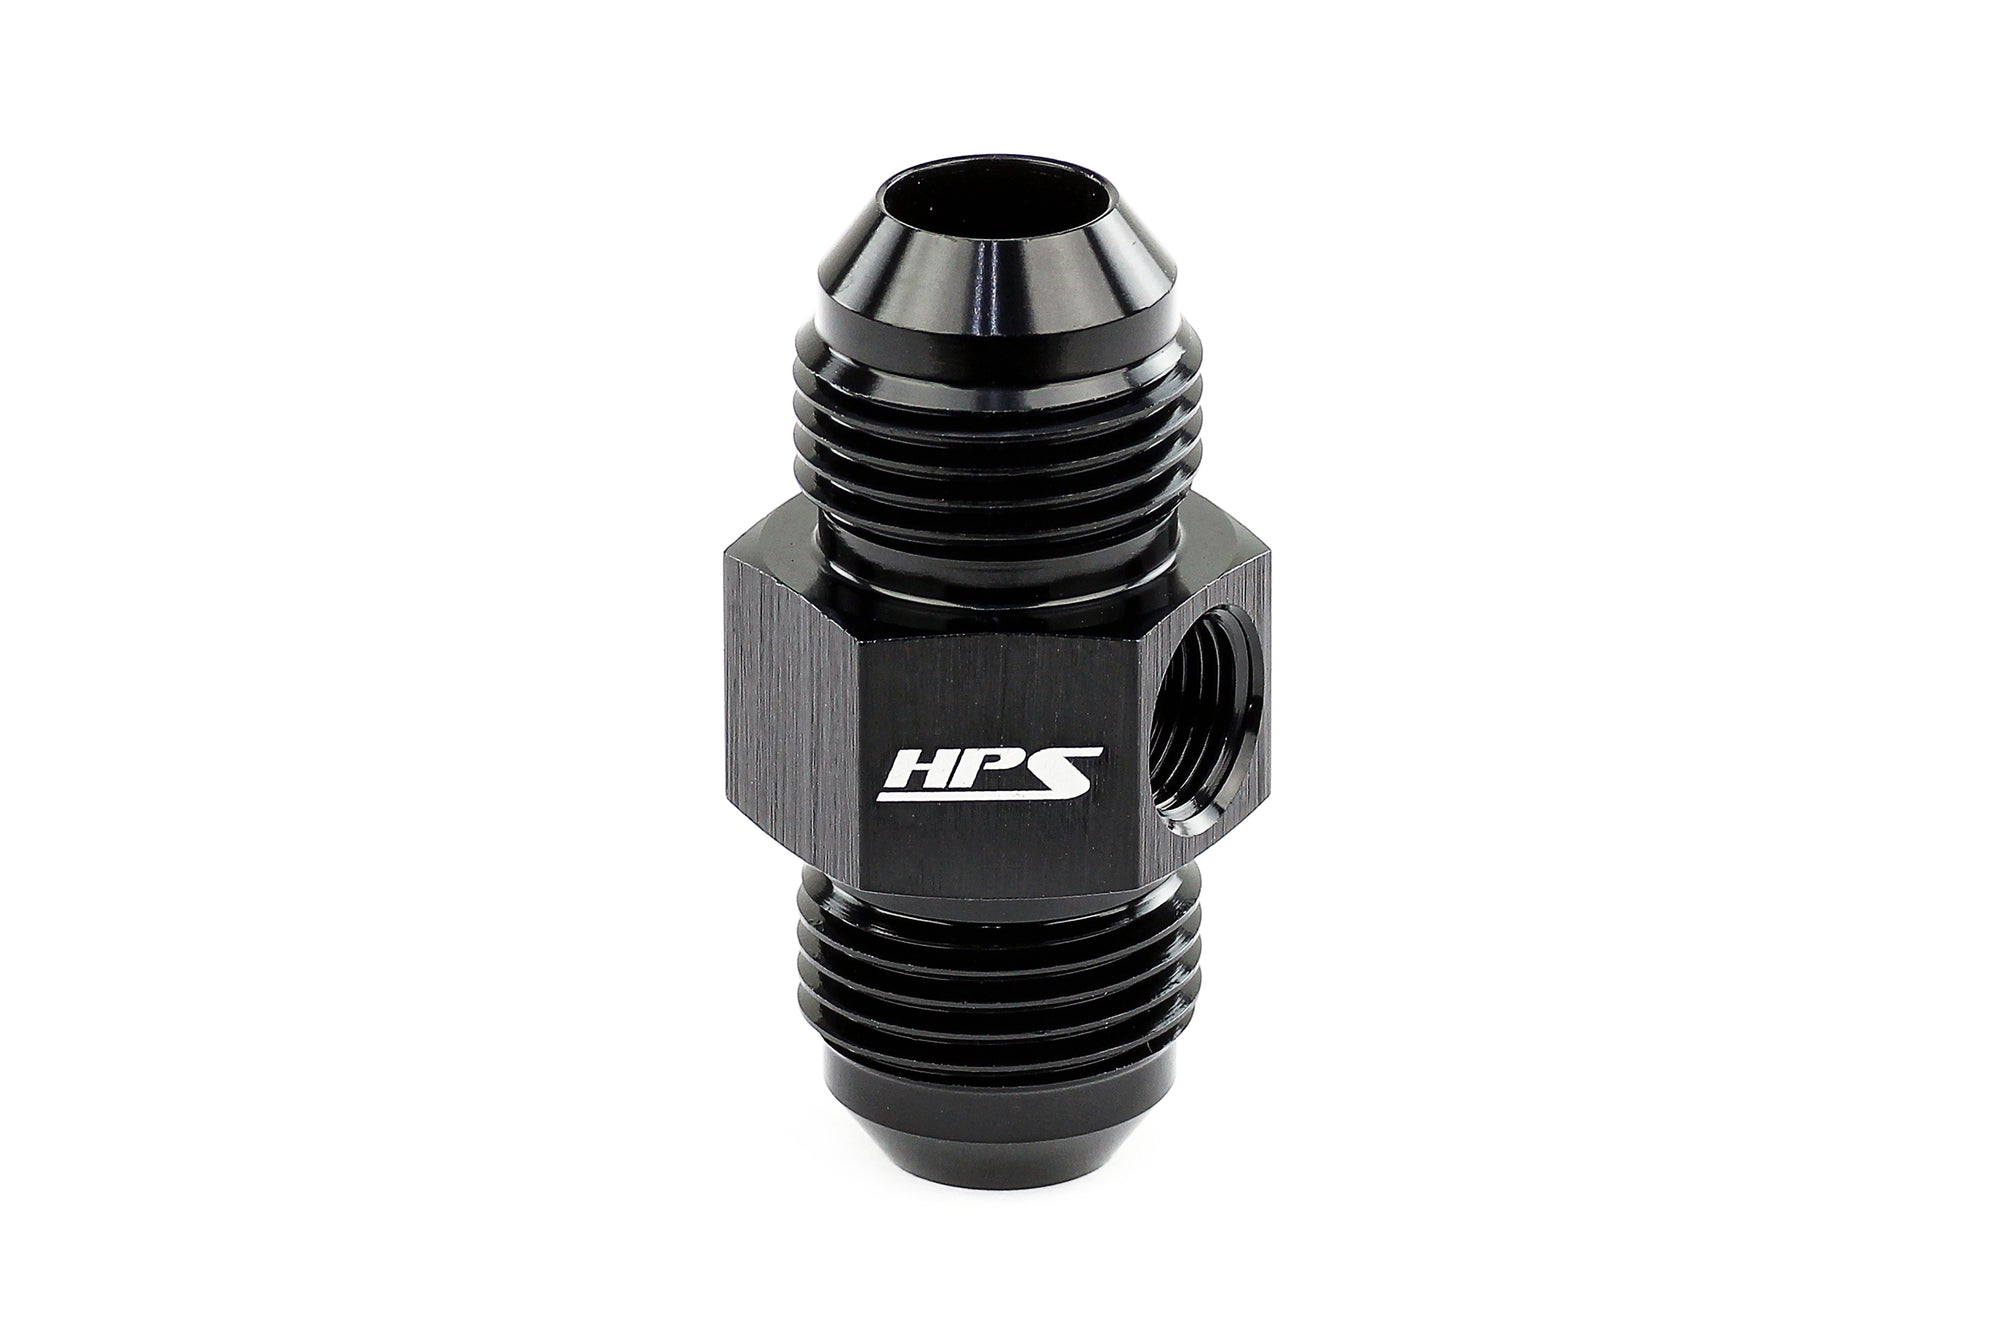 HPS Performance Black Aluminum AN Male to Male Adapter with 1/8" NPT Female Port Fuel Pressure Gauge -8 -10 -12